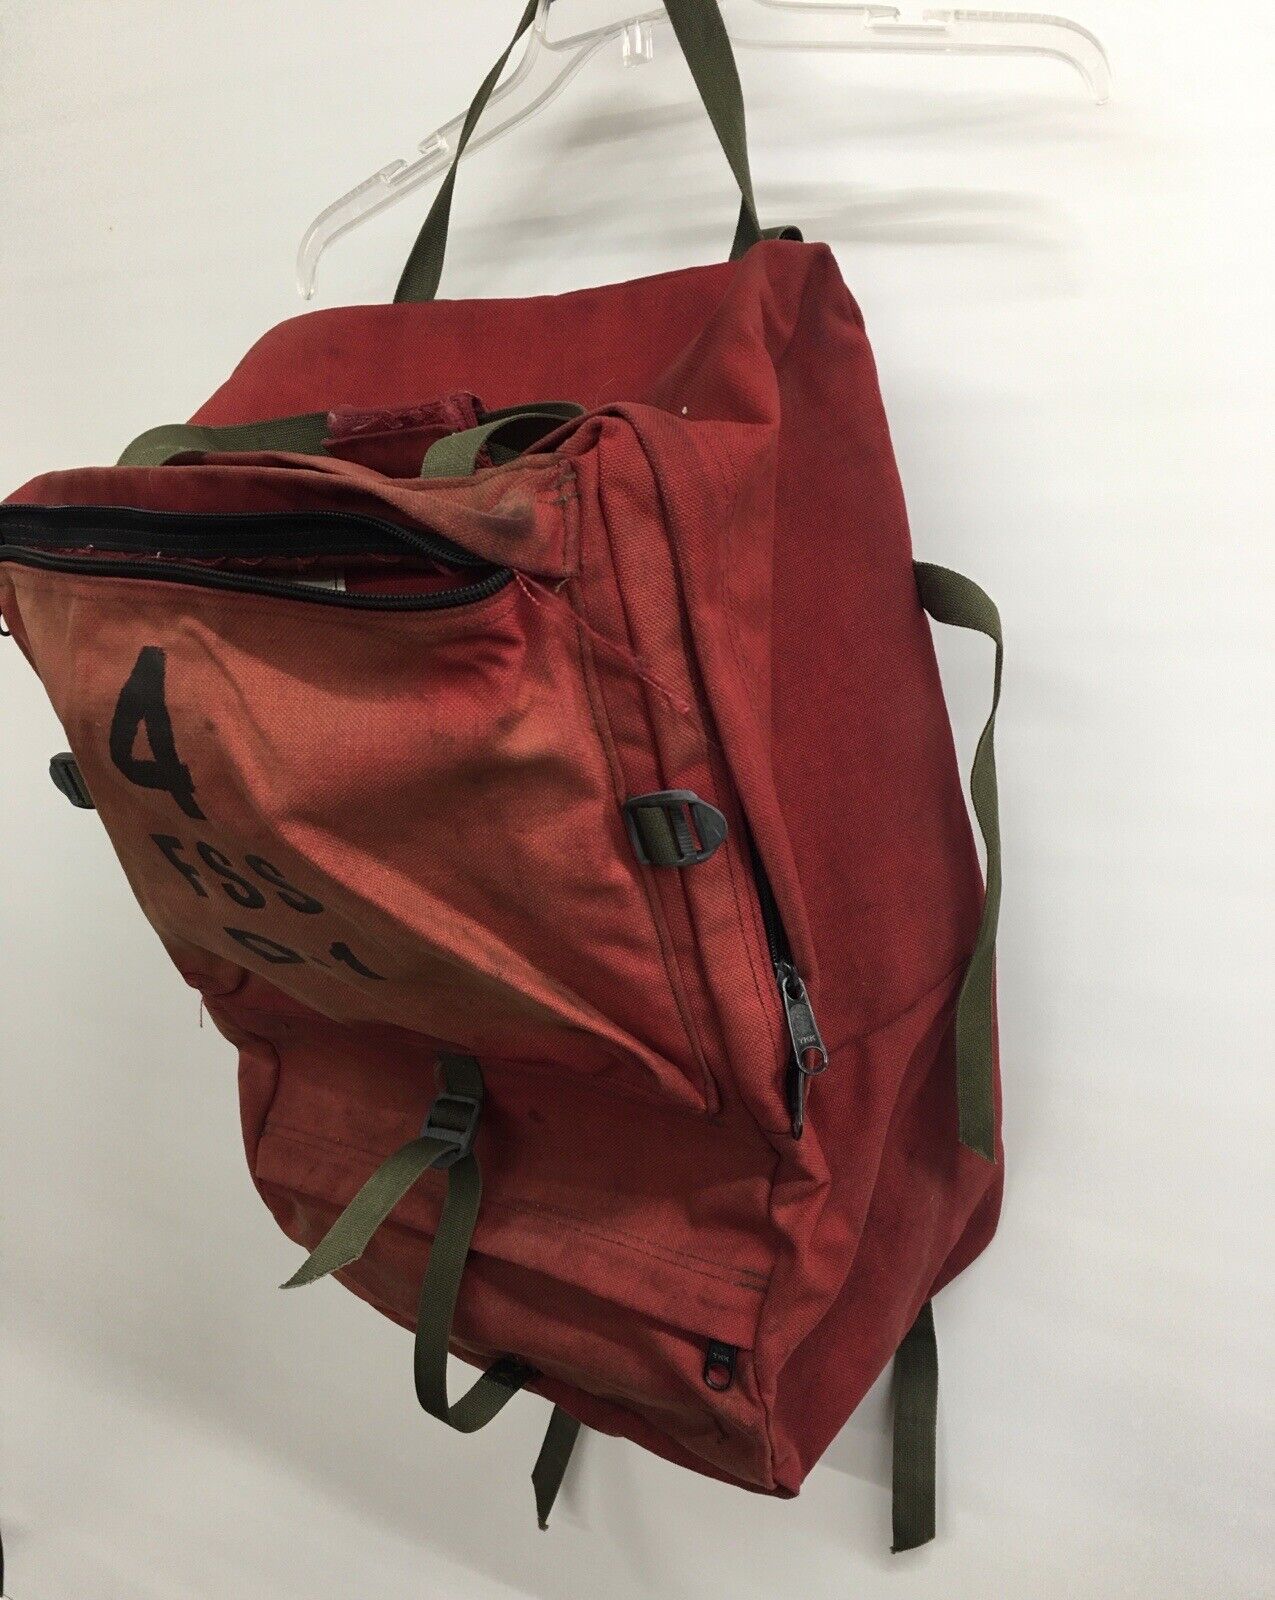 Old Big Red Fss Forest Service Personal Wildland Fire Fighter Backpack Rucksack